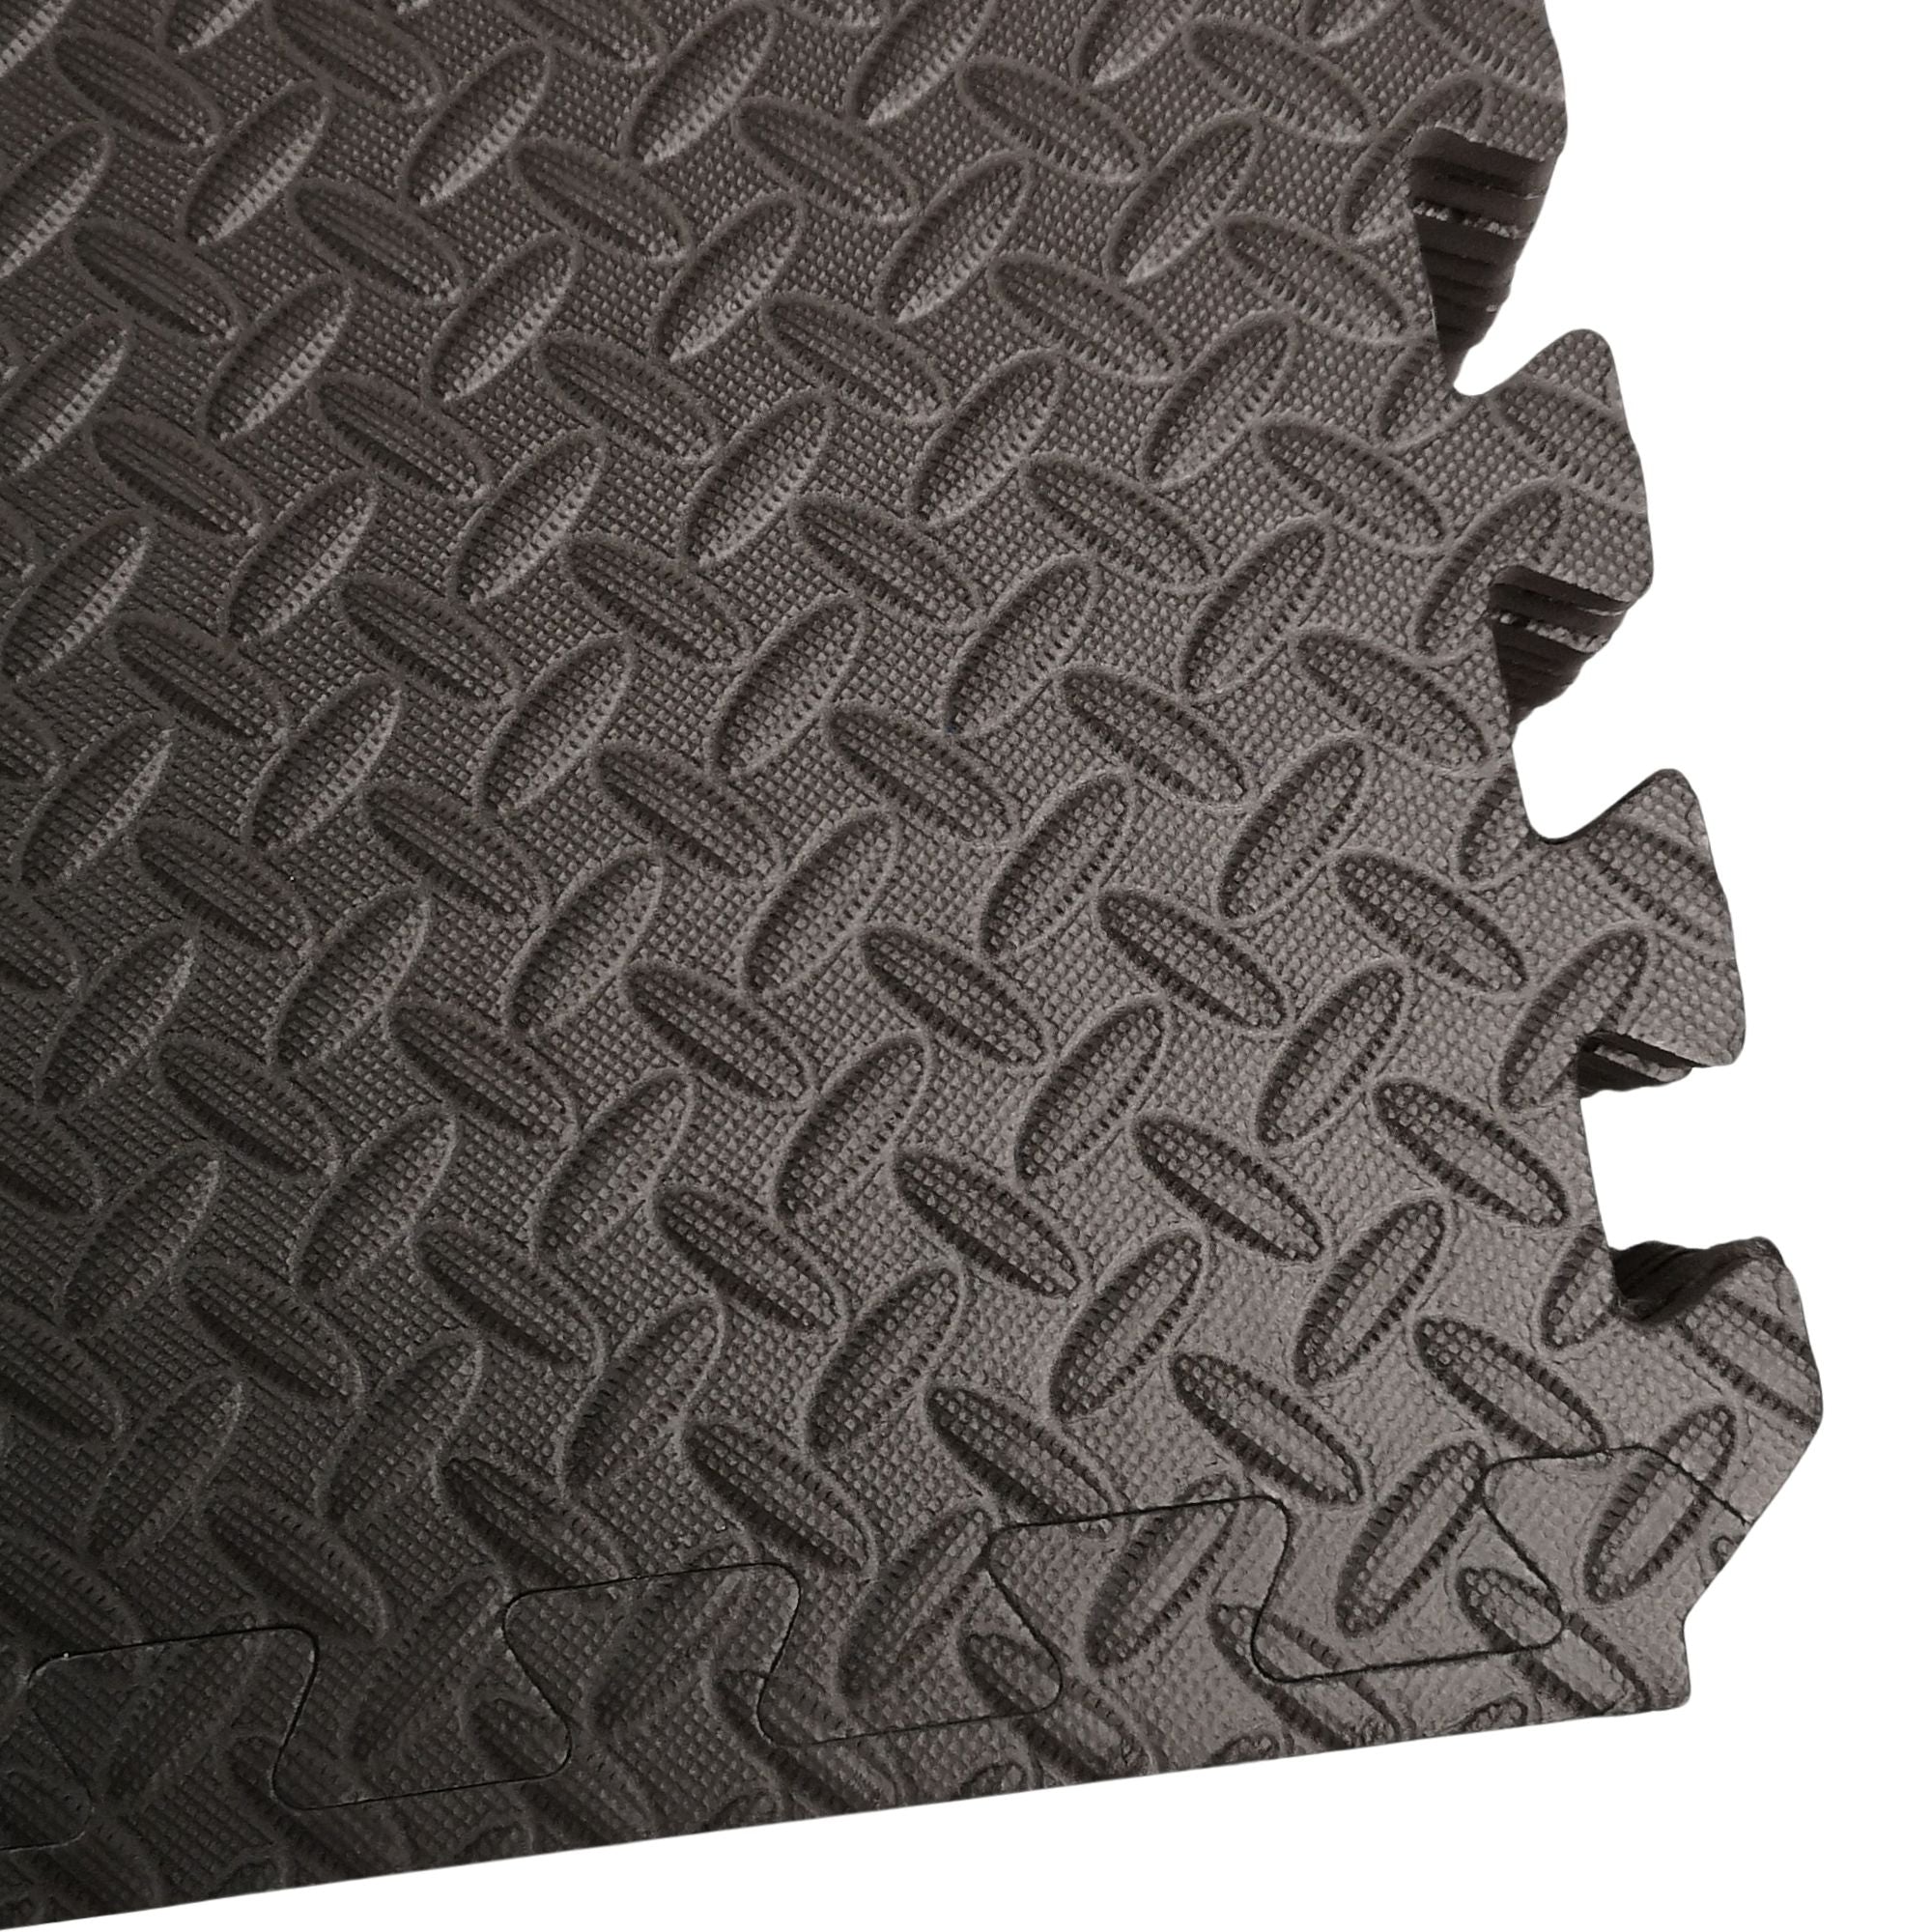 4 Piece EVA Foam Floor Protective Floor Tiles / Mats 60x60cm Each Set For Gyms, Kitchens, Garages, Camping, Kids Play Matting, Hot Tub Flooring Mats And Much More Set Covers 1.44 sqm (15.5 sq ft)